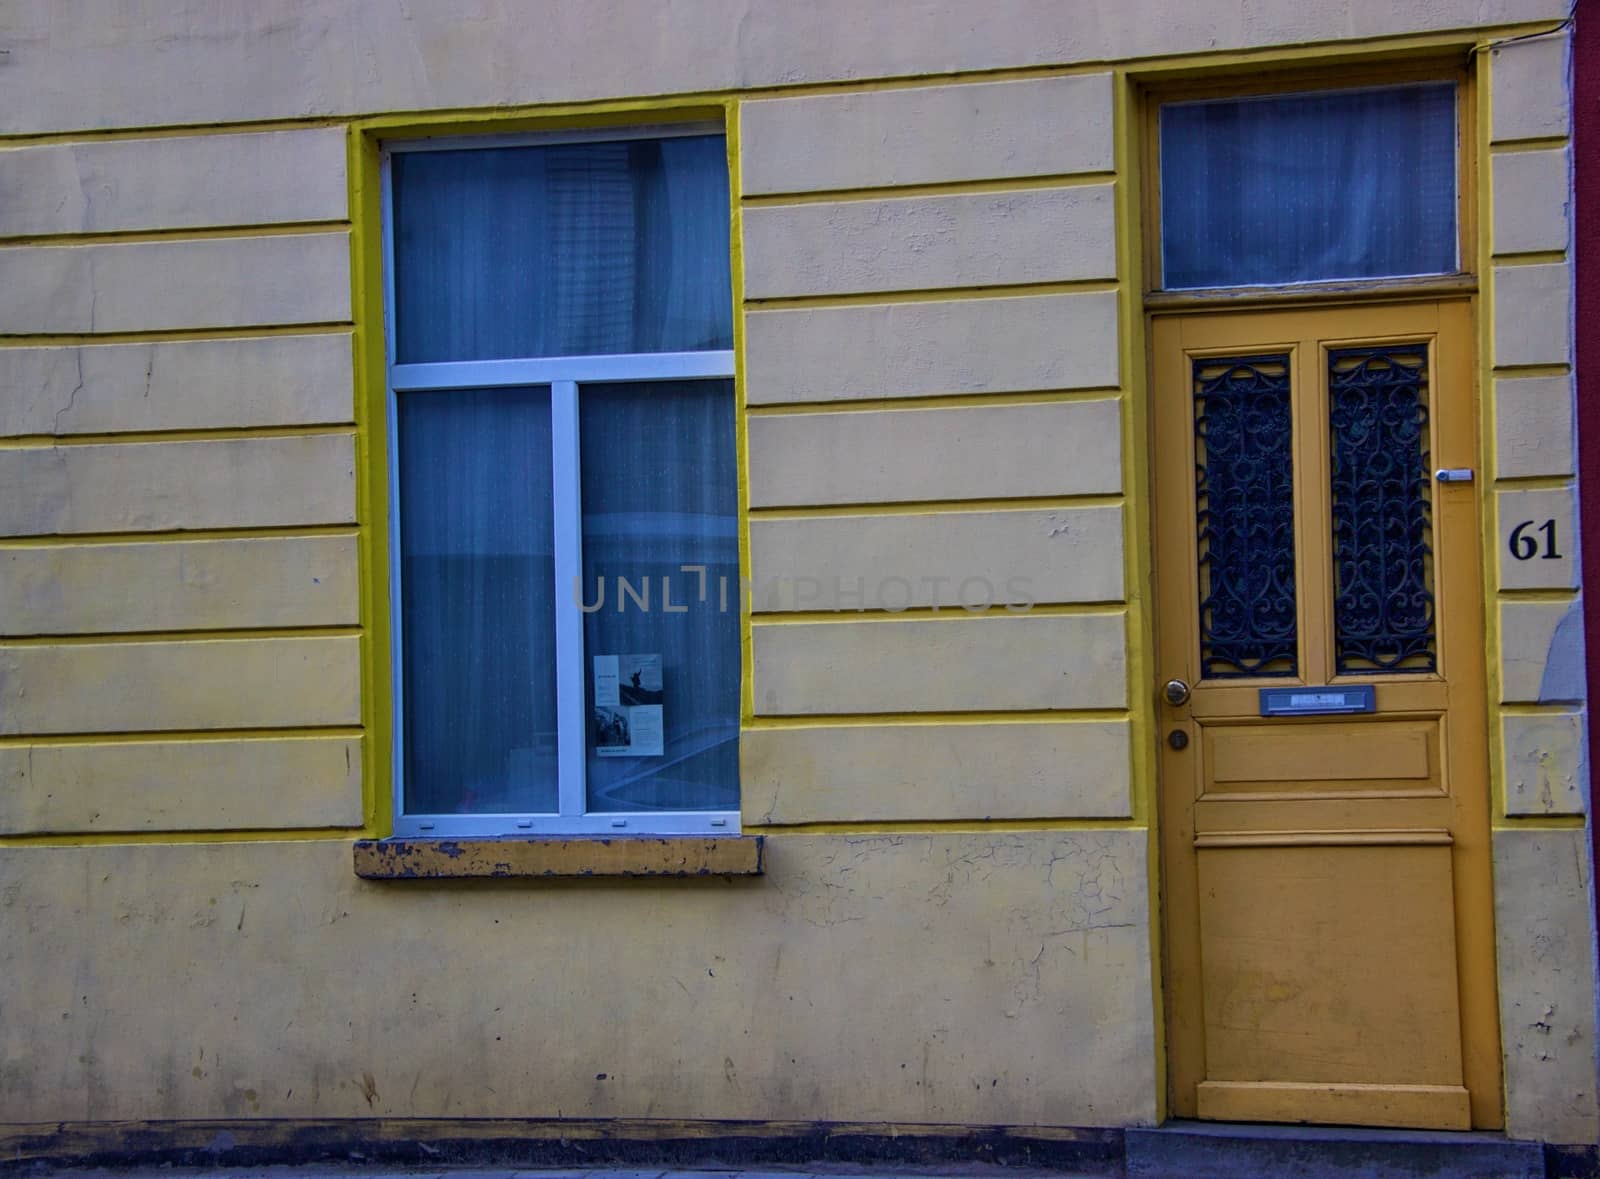 Detail of a house - Yellow door